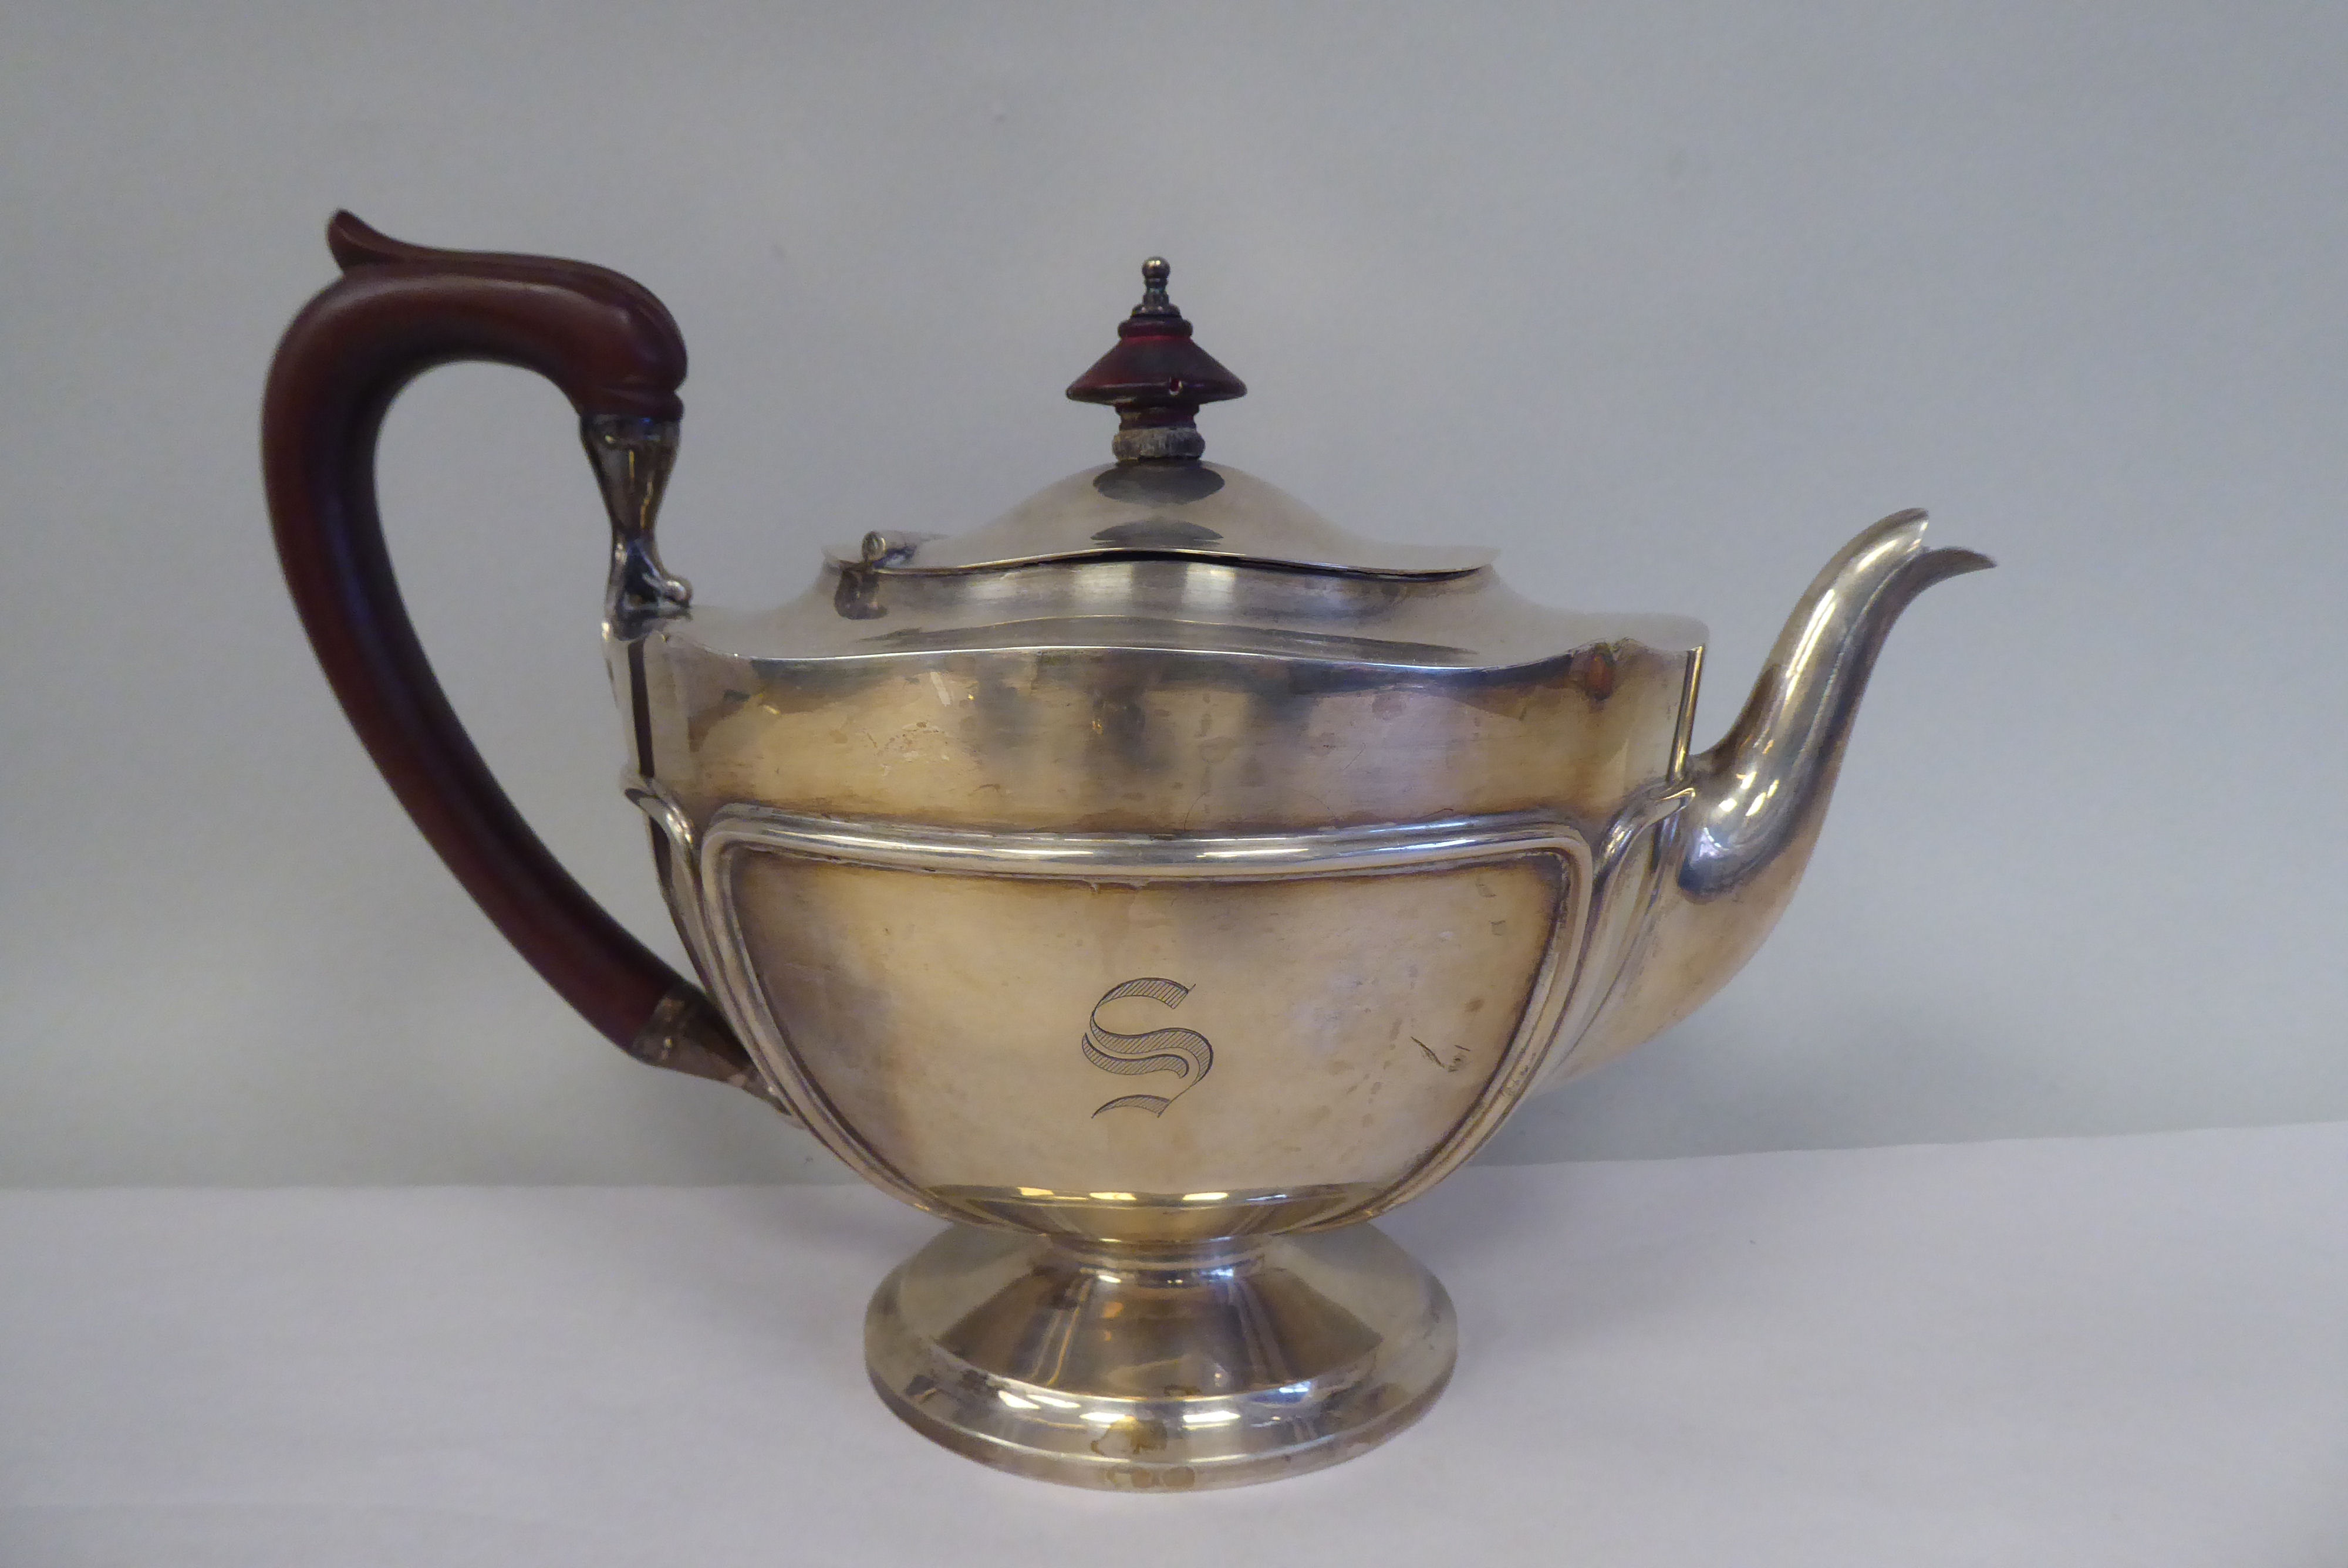 A four piece silver tea set, comprising a teapot of pedestal bowl display with an S-swept swept, - Image 7 of 12